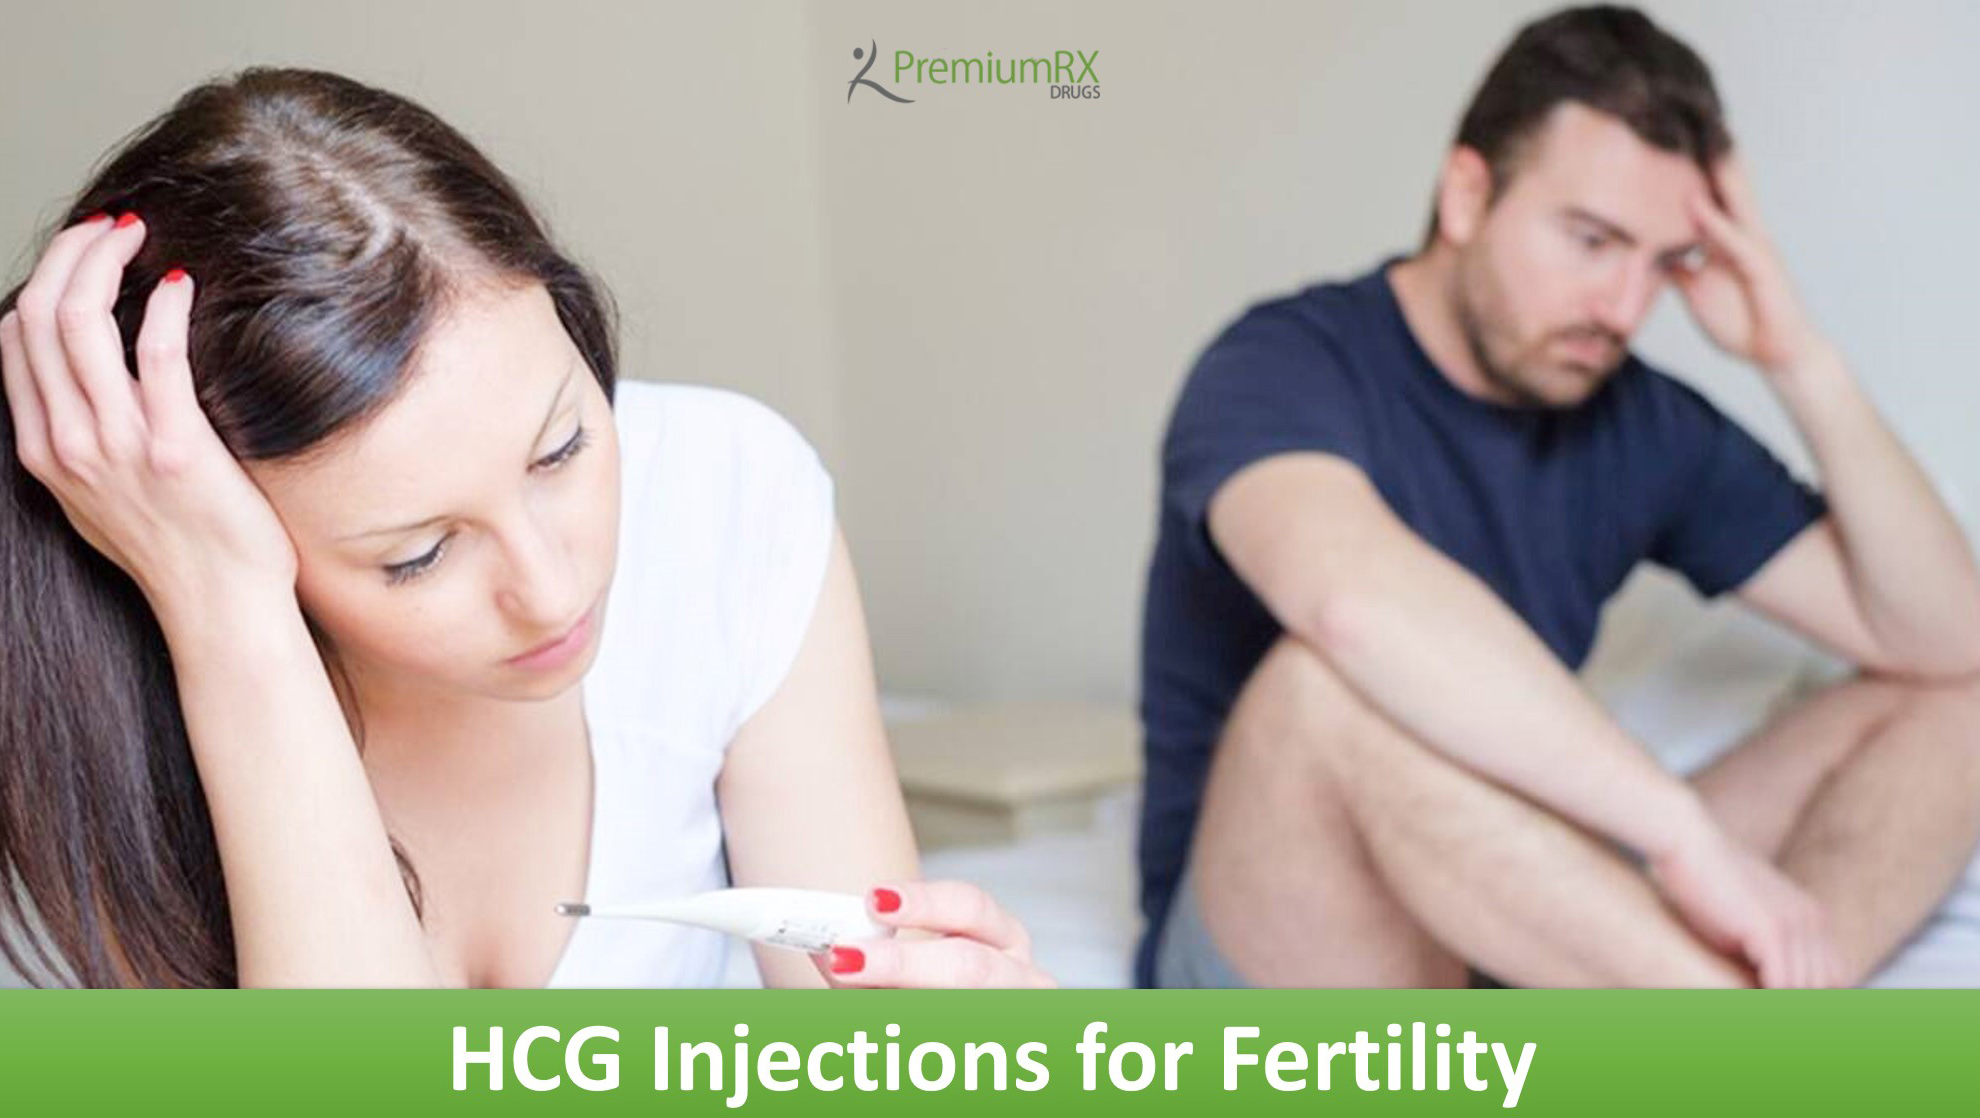 Buy HCG injections for Fertility Online